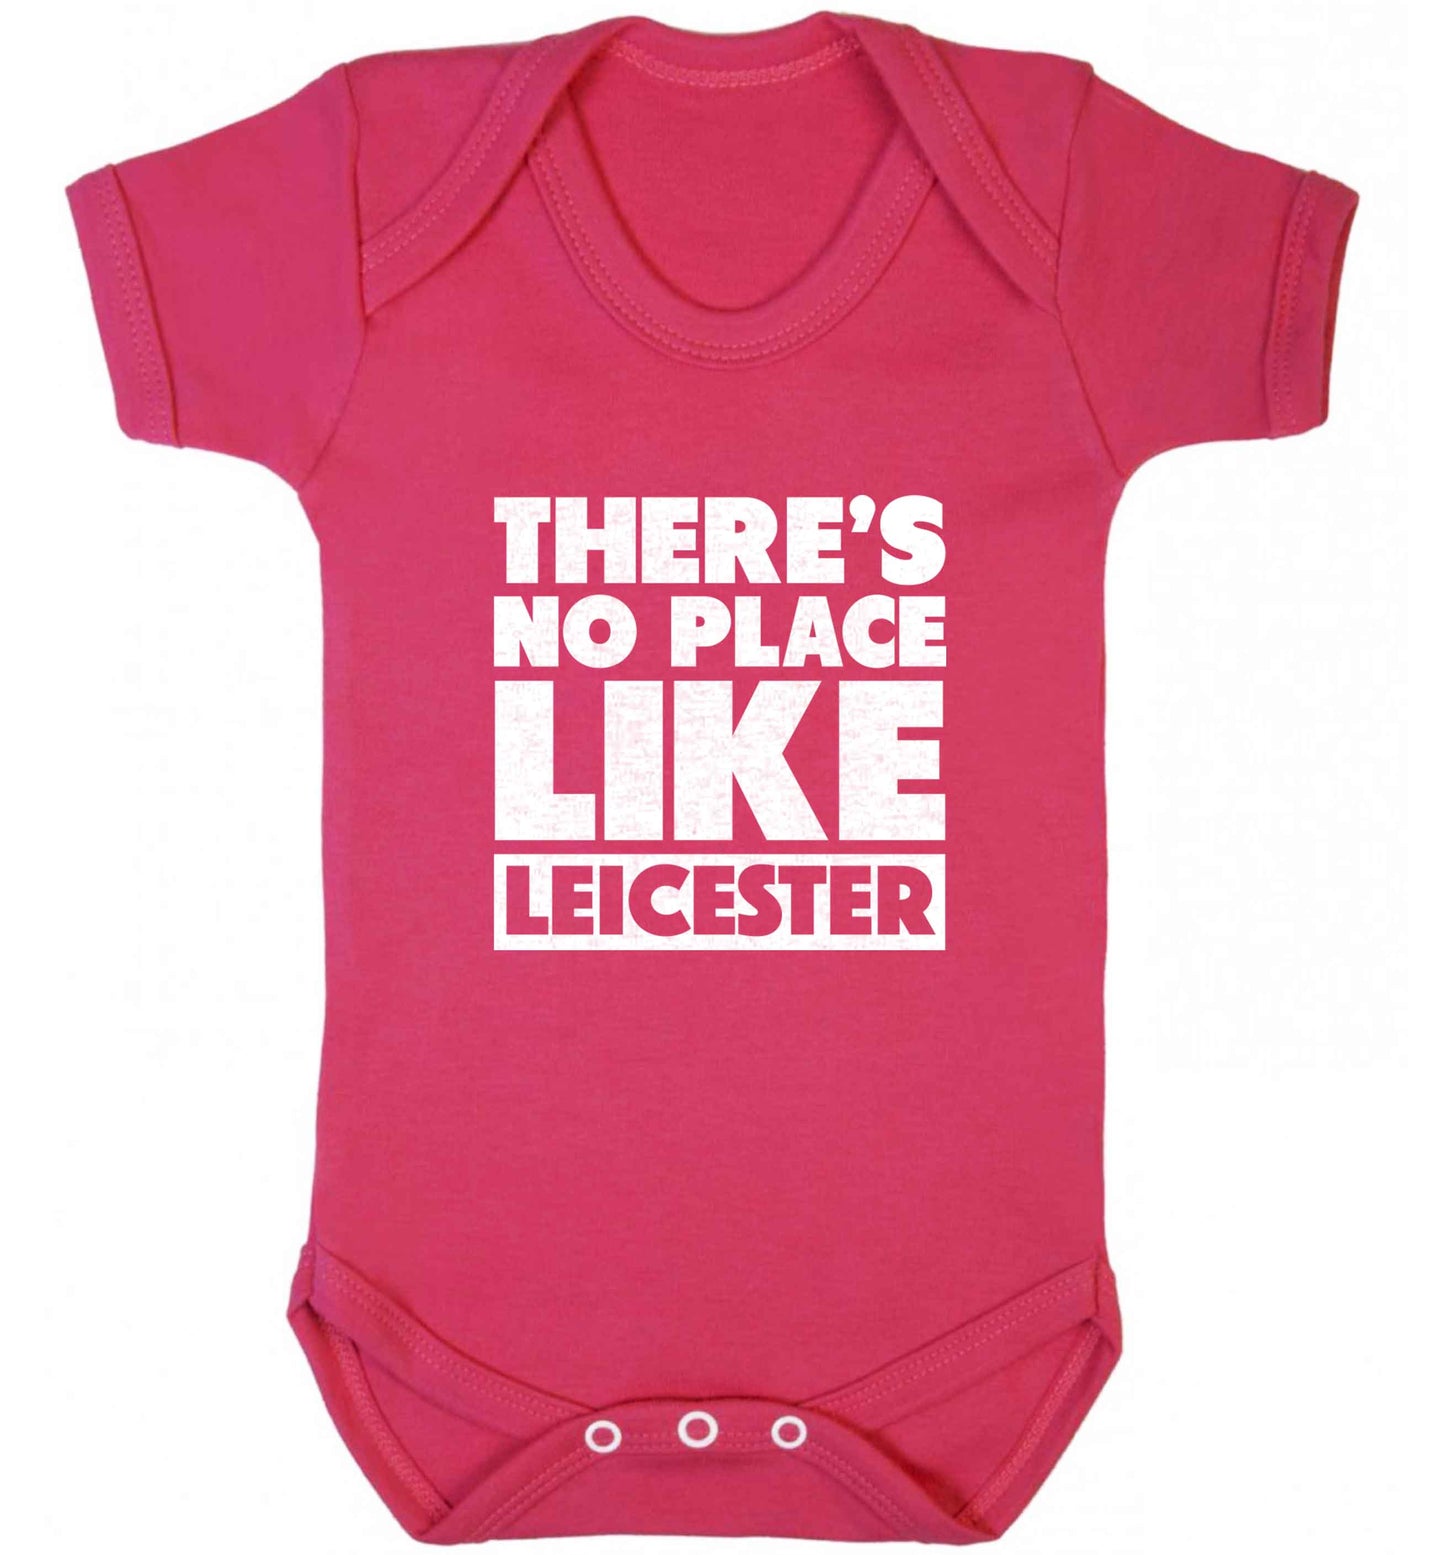 There's no place like Leicester baby vest dark pink 18-24 months